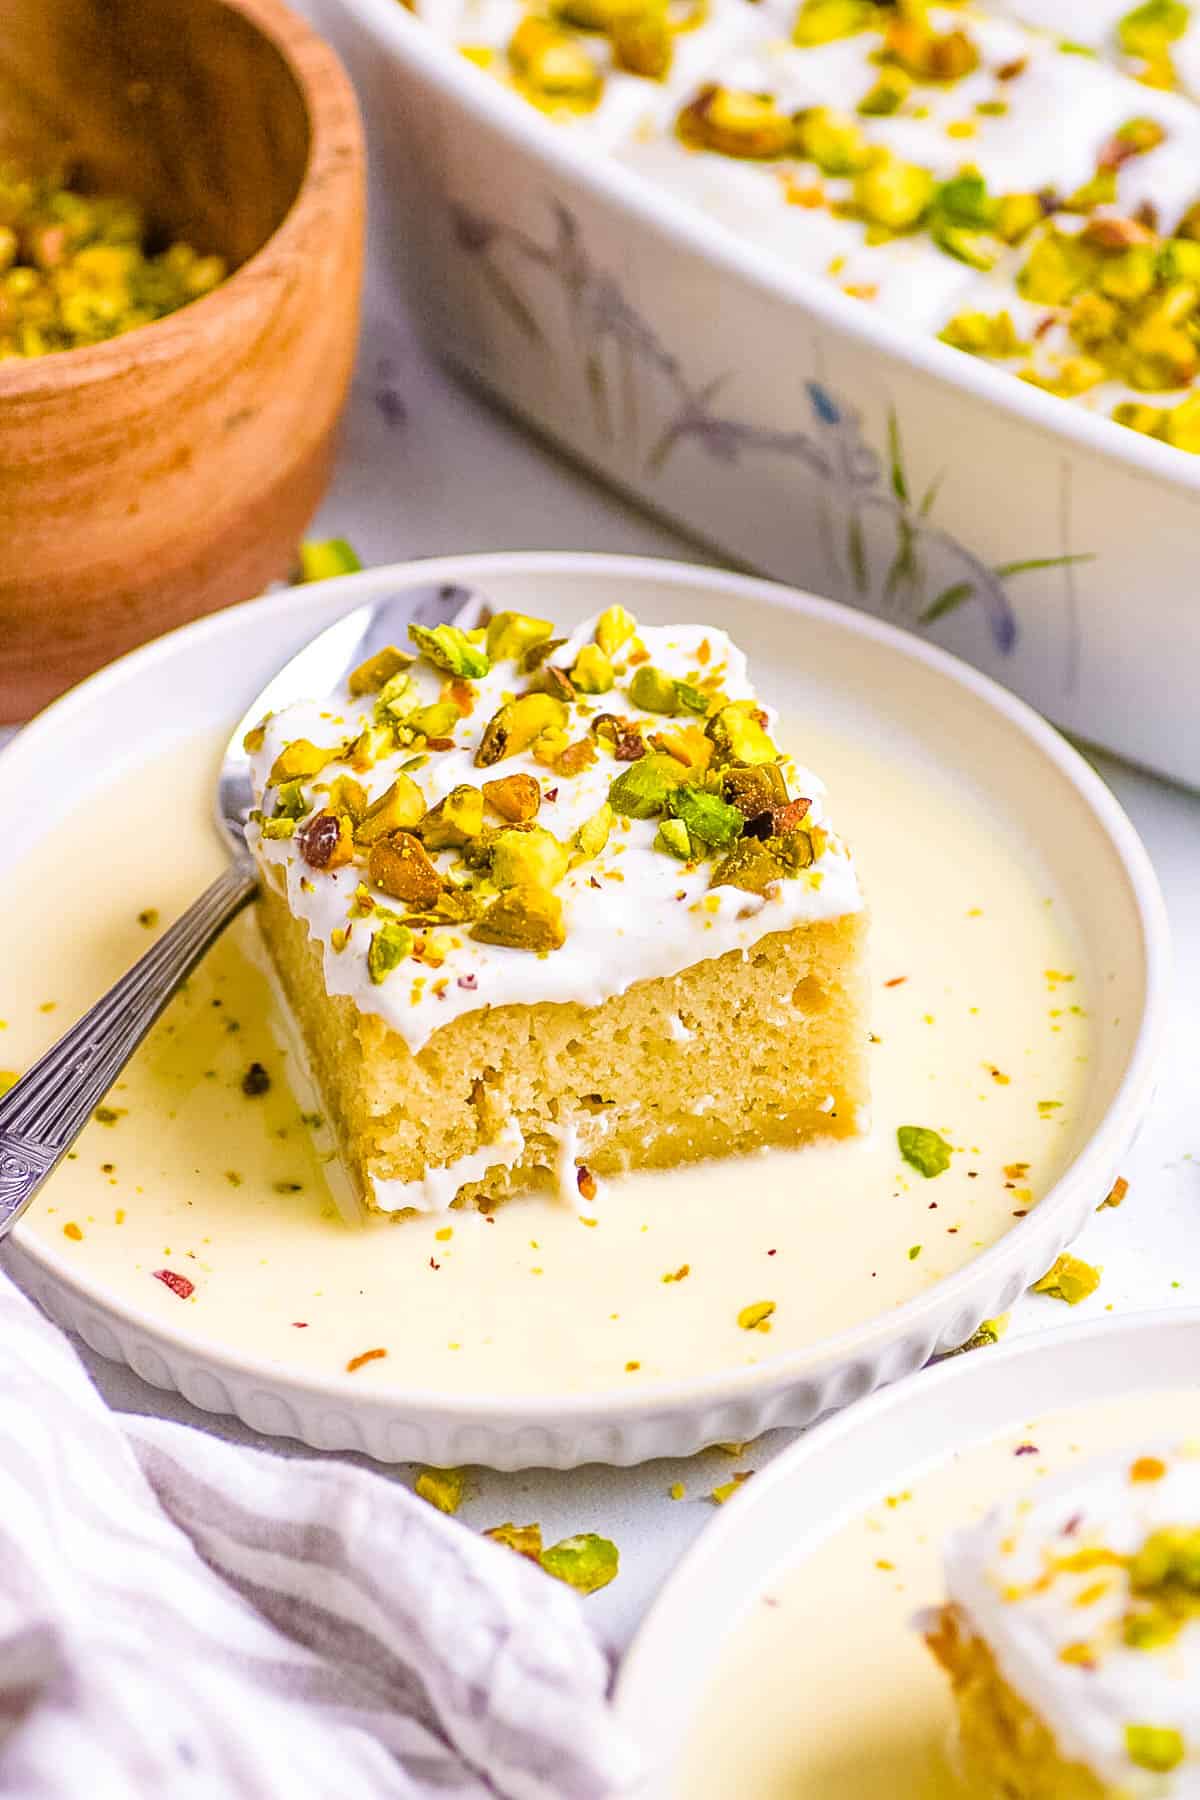 Rasmalai tres leches cake served on a white plate, topped with pistachios and the sweetened milk mixture.